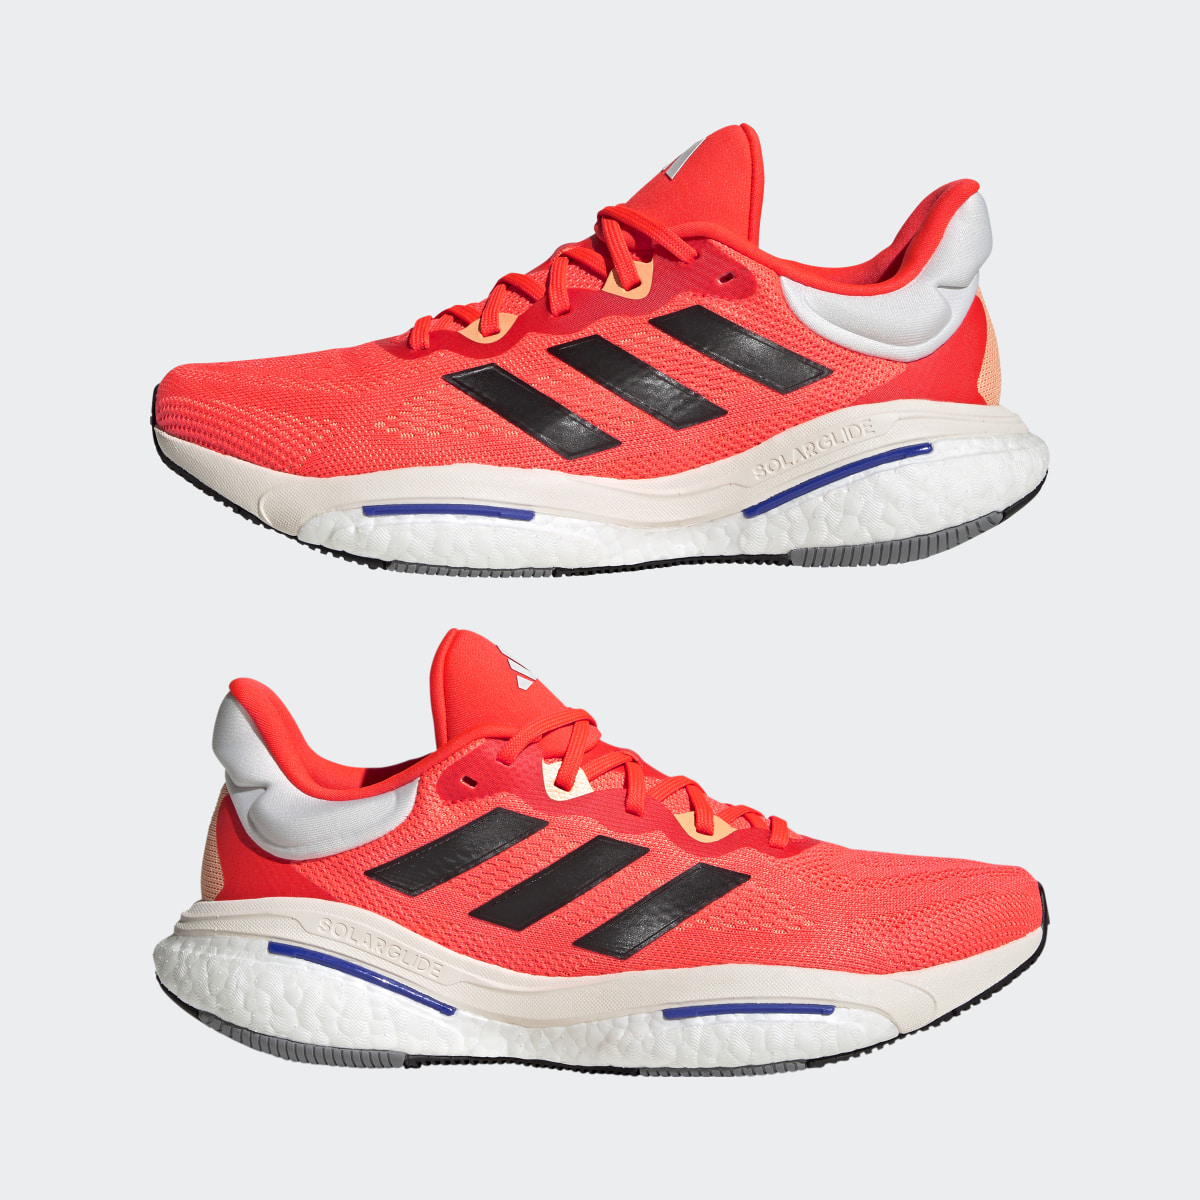 Adidas SOLARGLIDE 6 Running Shoes. 8